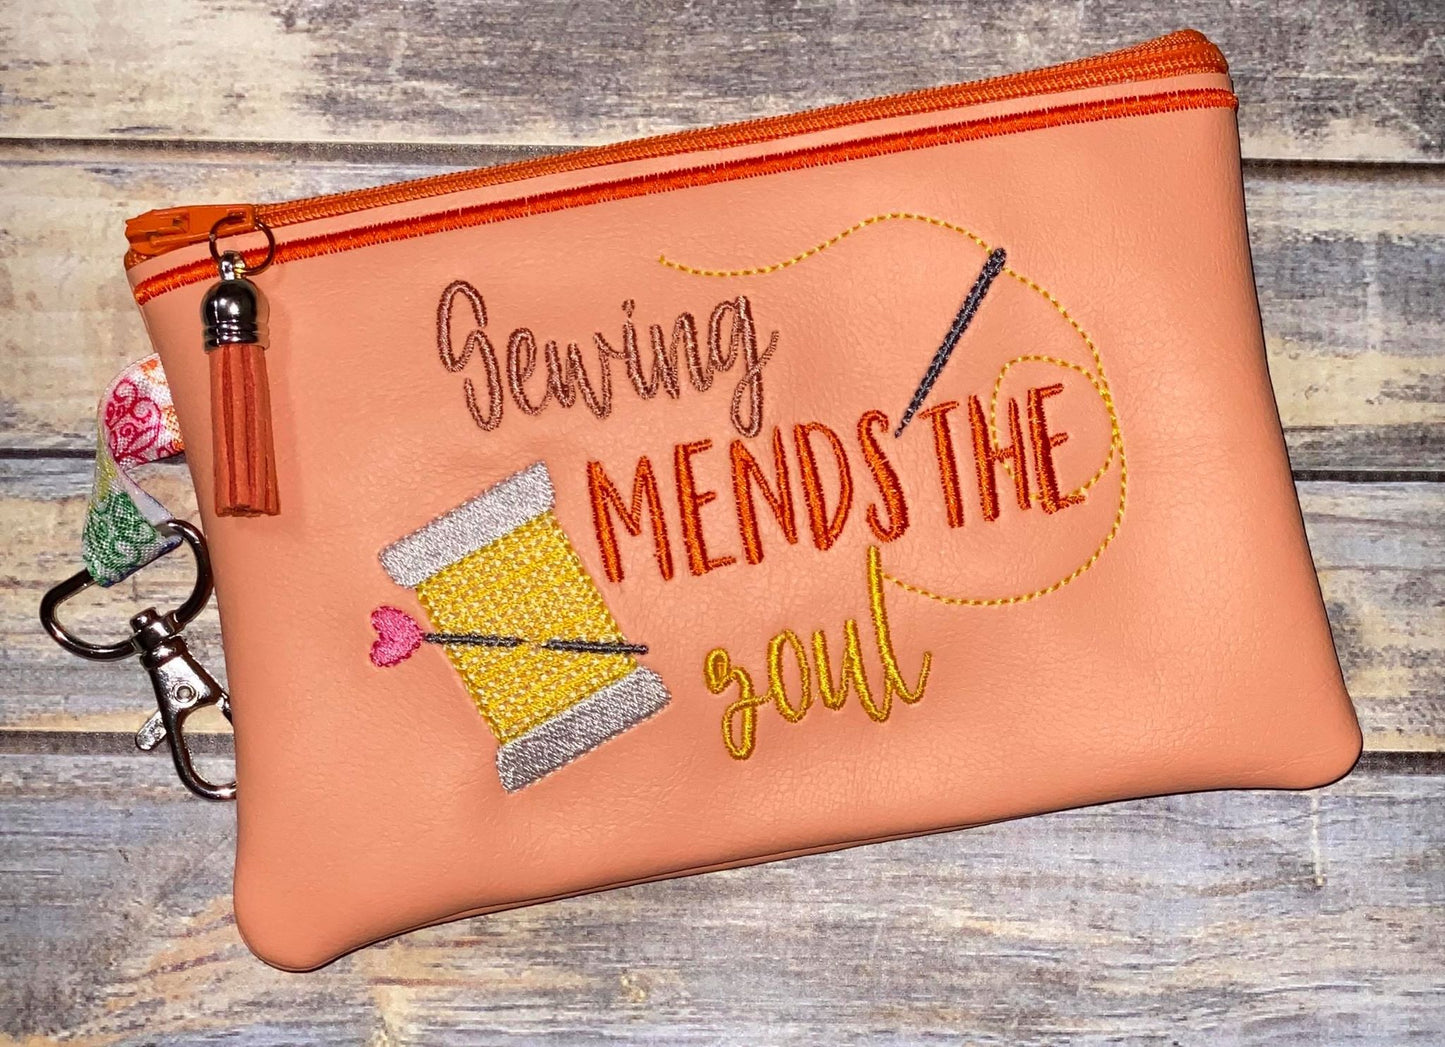 Sewing Mends the Soul Zipper Bag - 3 sizes - Digital Embroidery Design